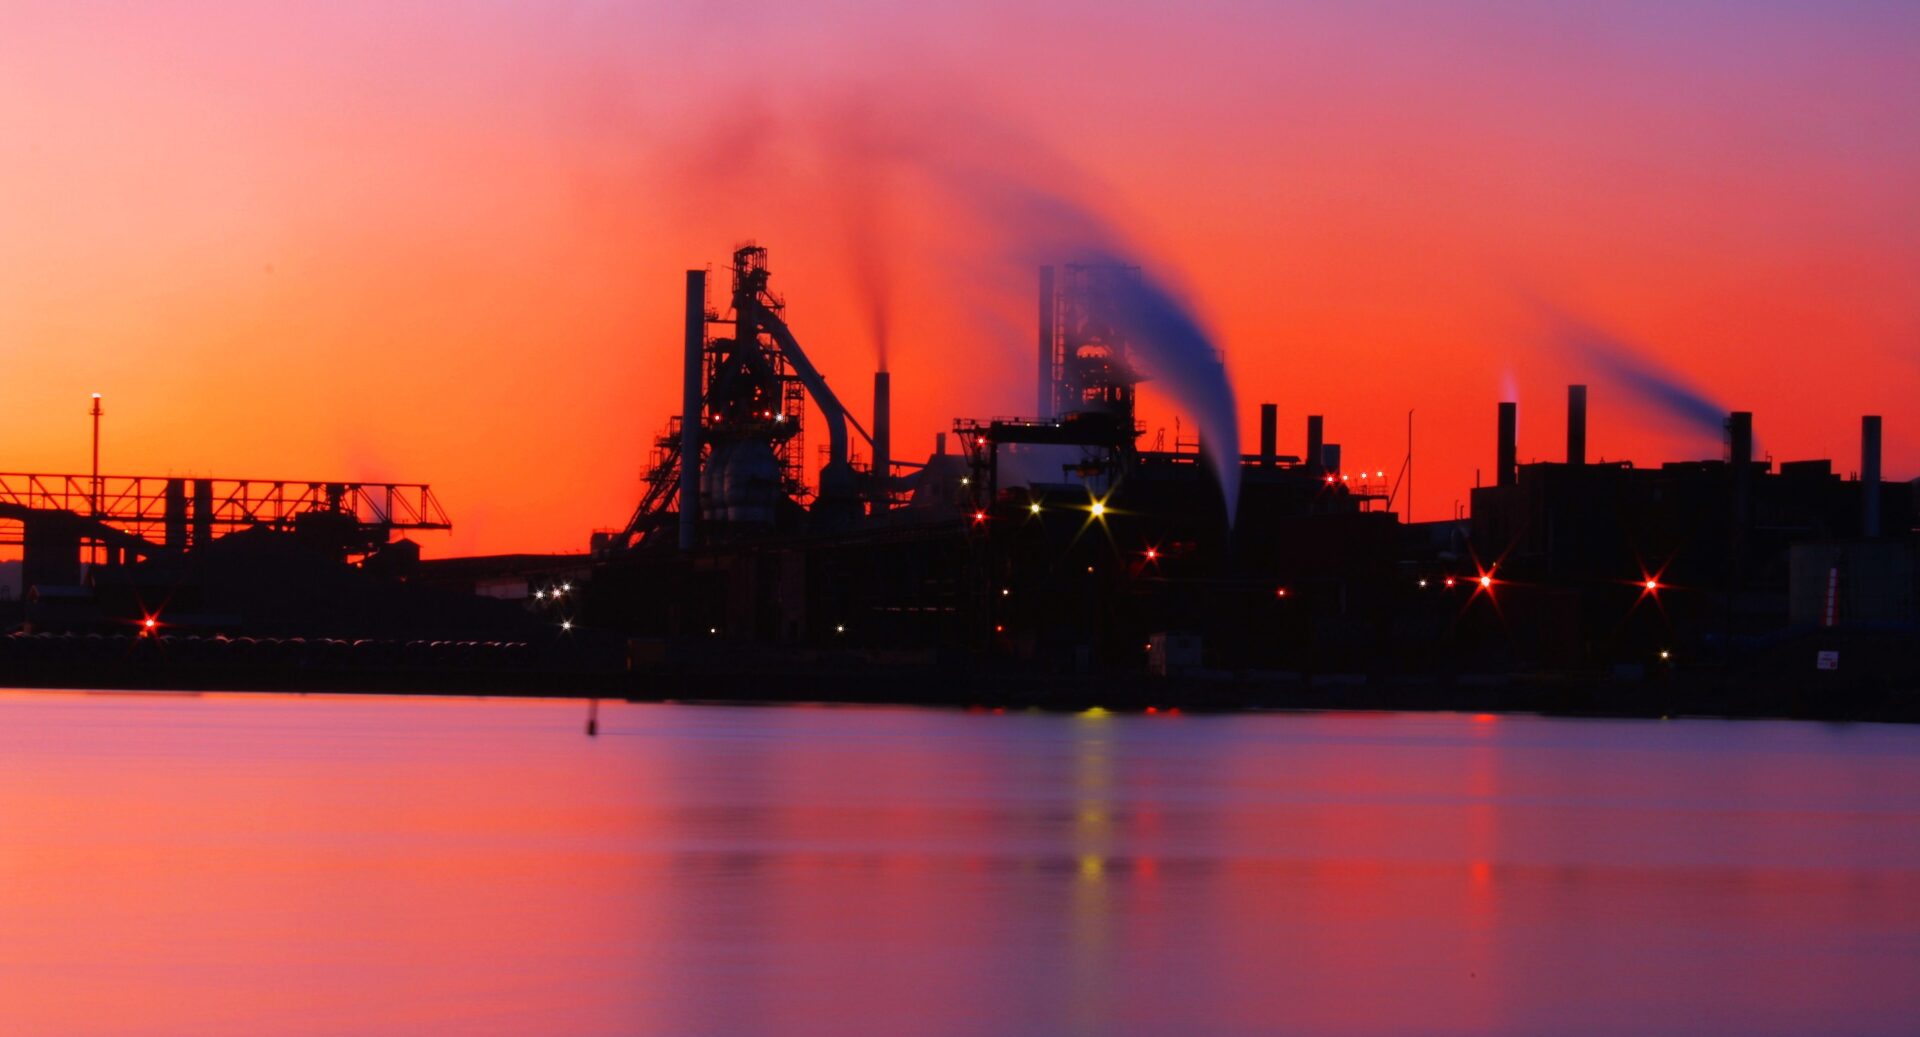 An industrial complex at sunset. The complex is built near a body of water and large plumes of smoke rise from smoke stacks.